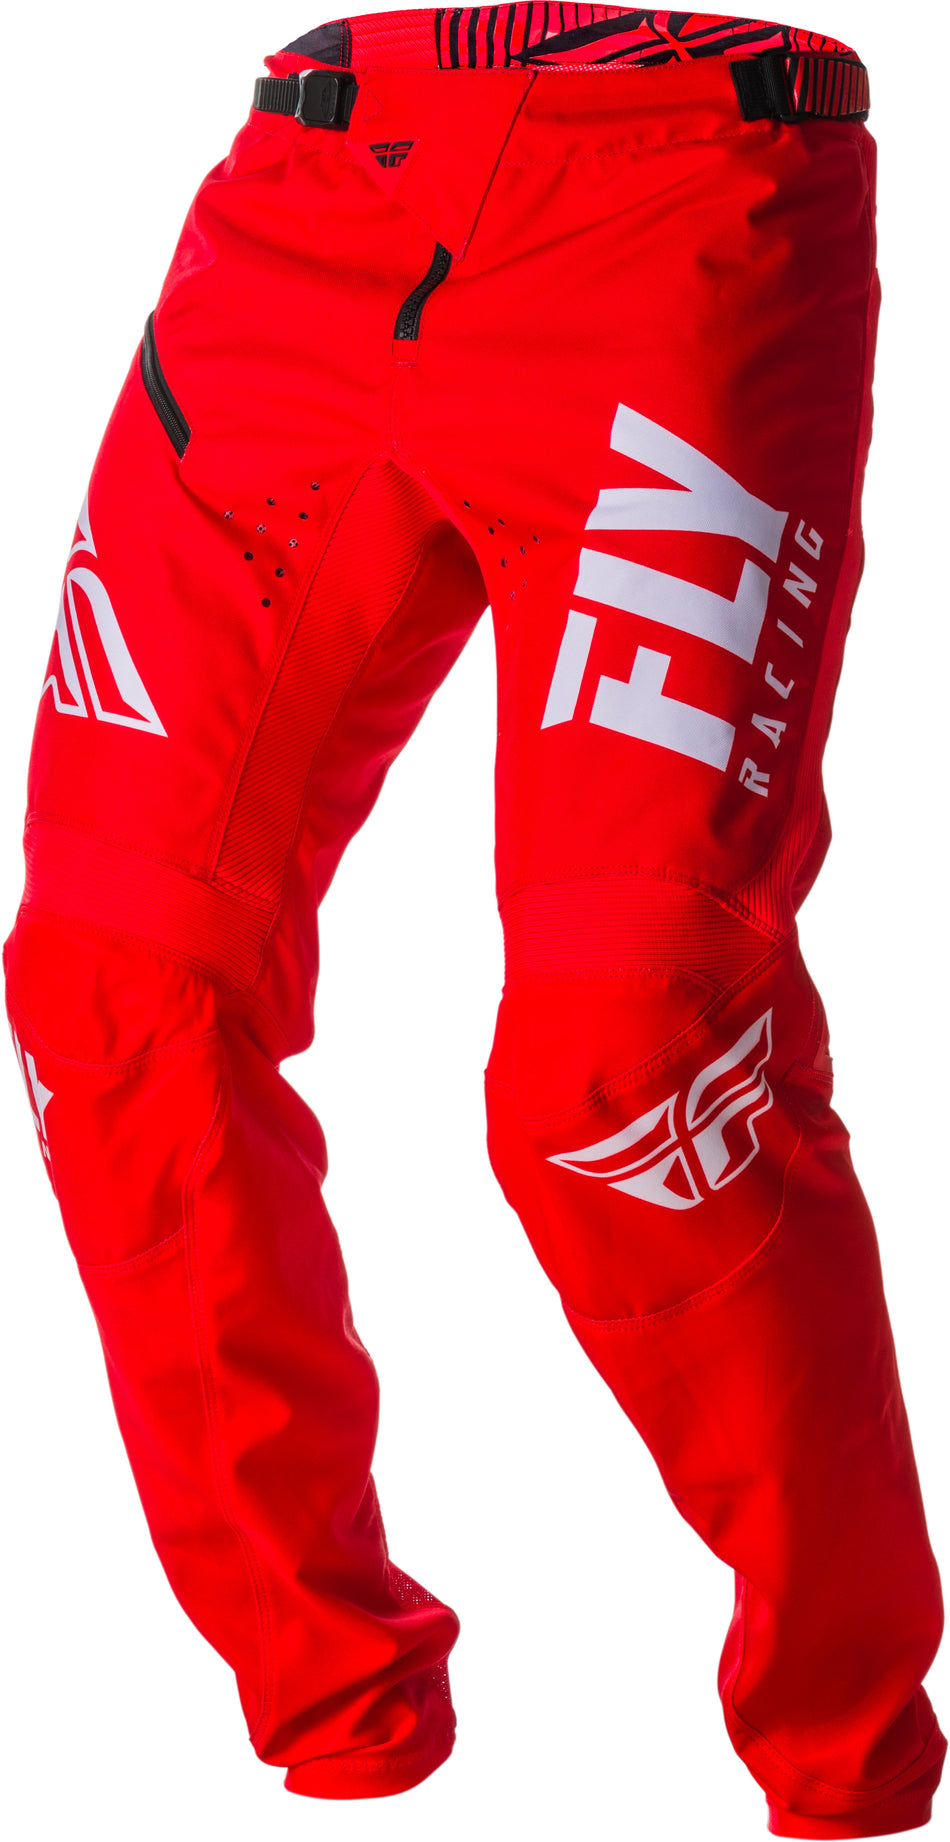 FLY RACING Kinetic Shield Bicycle Pants Red/White Sz 26 372-02226